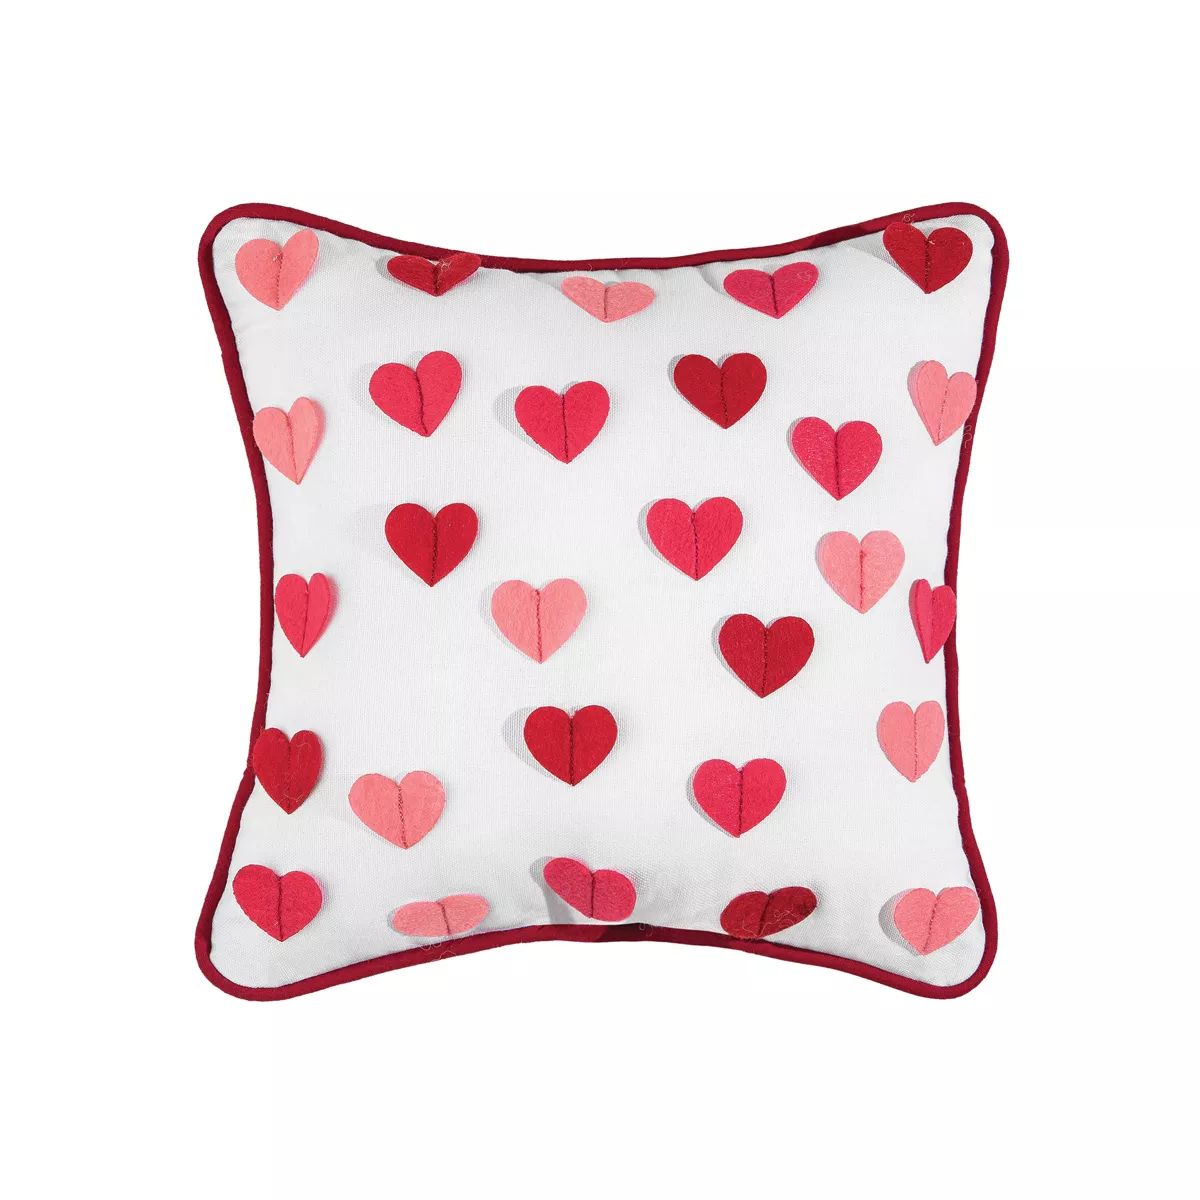 C&F Home 10" x 10" Heart Embroidered Throw Pillow Valentine's Day Themed | Target